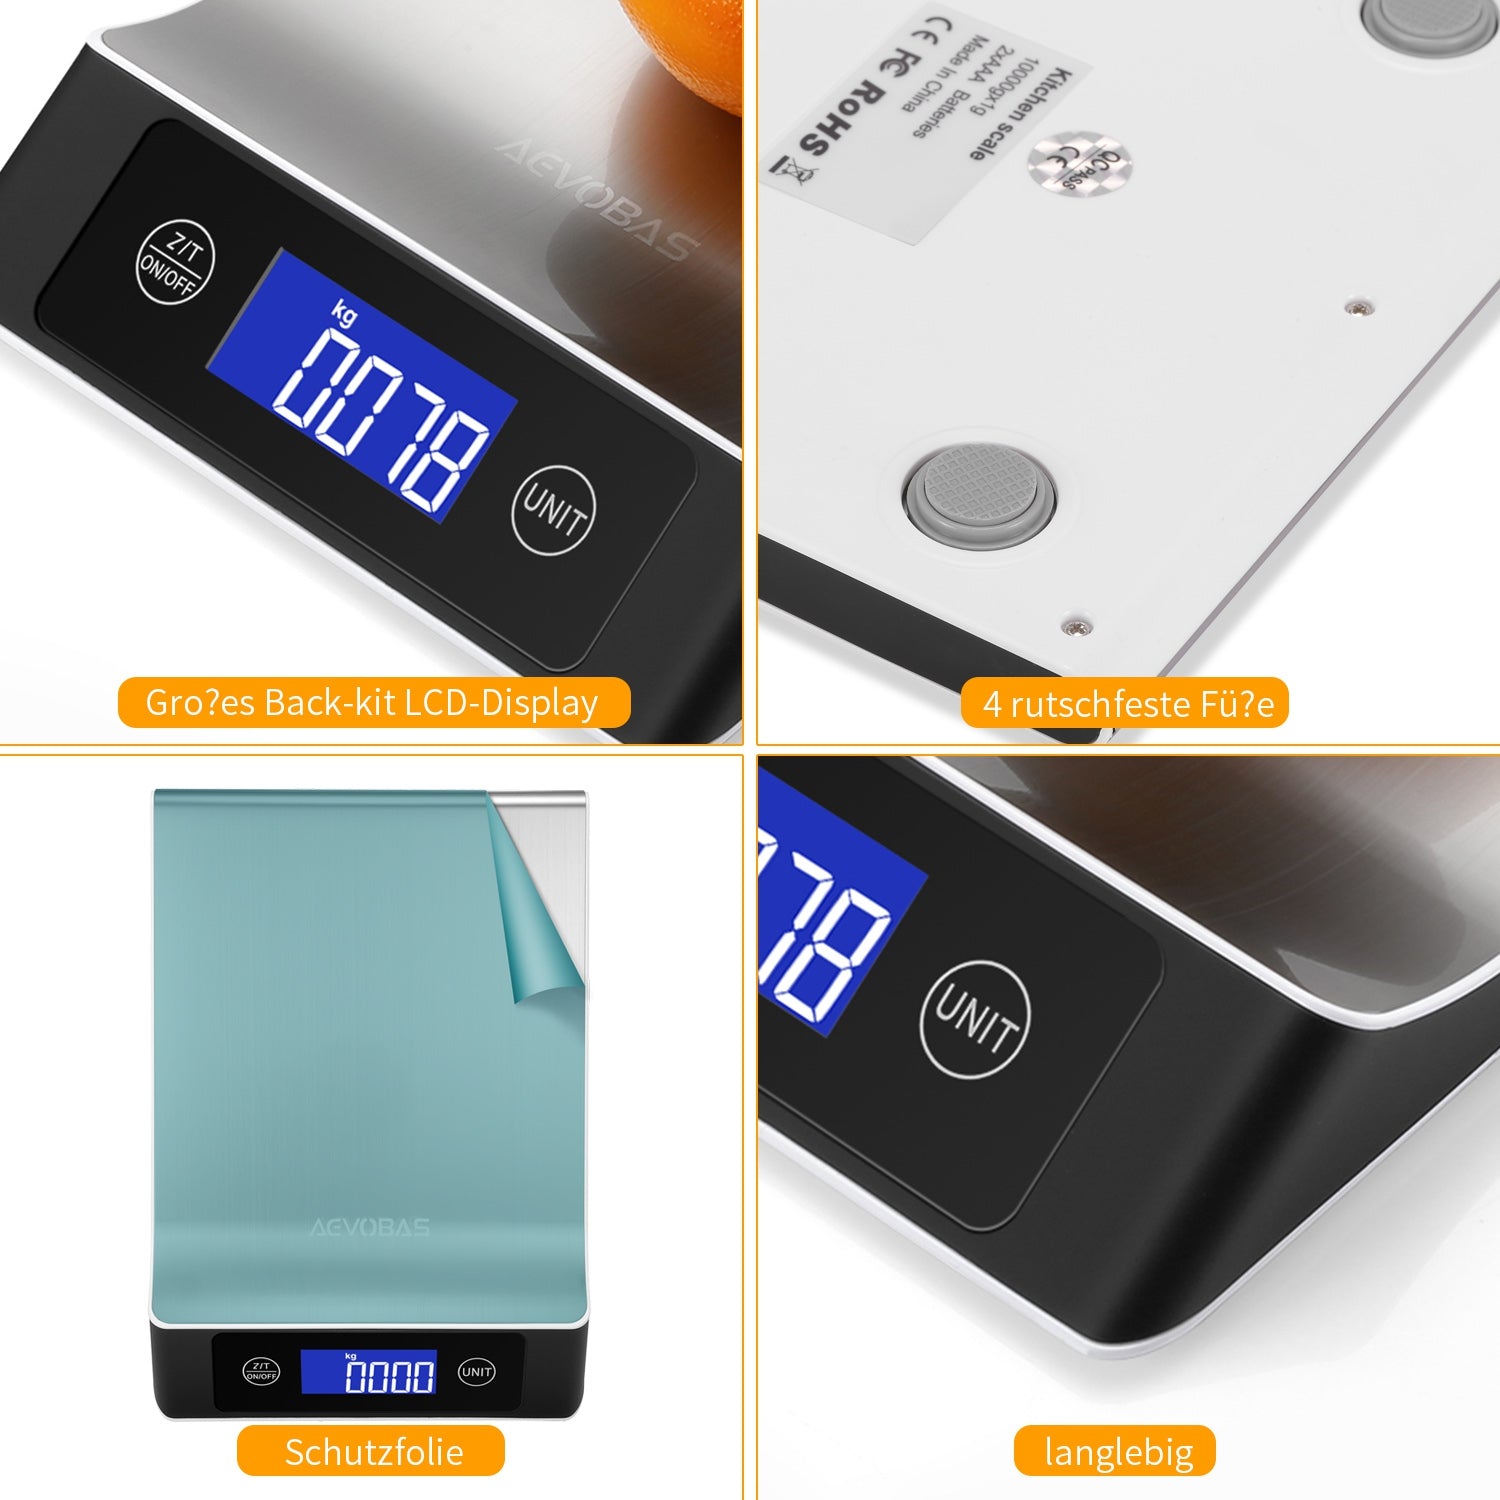 AEVOBAS CX - 2017 Digital Kitchen Food Weighing Scale with Back-lit LCD Display